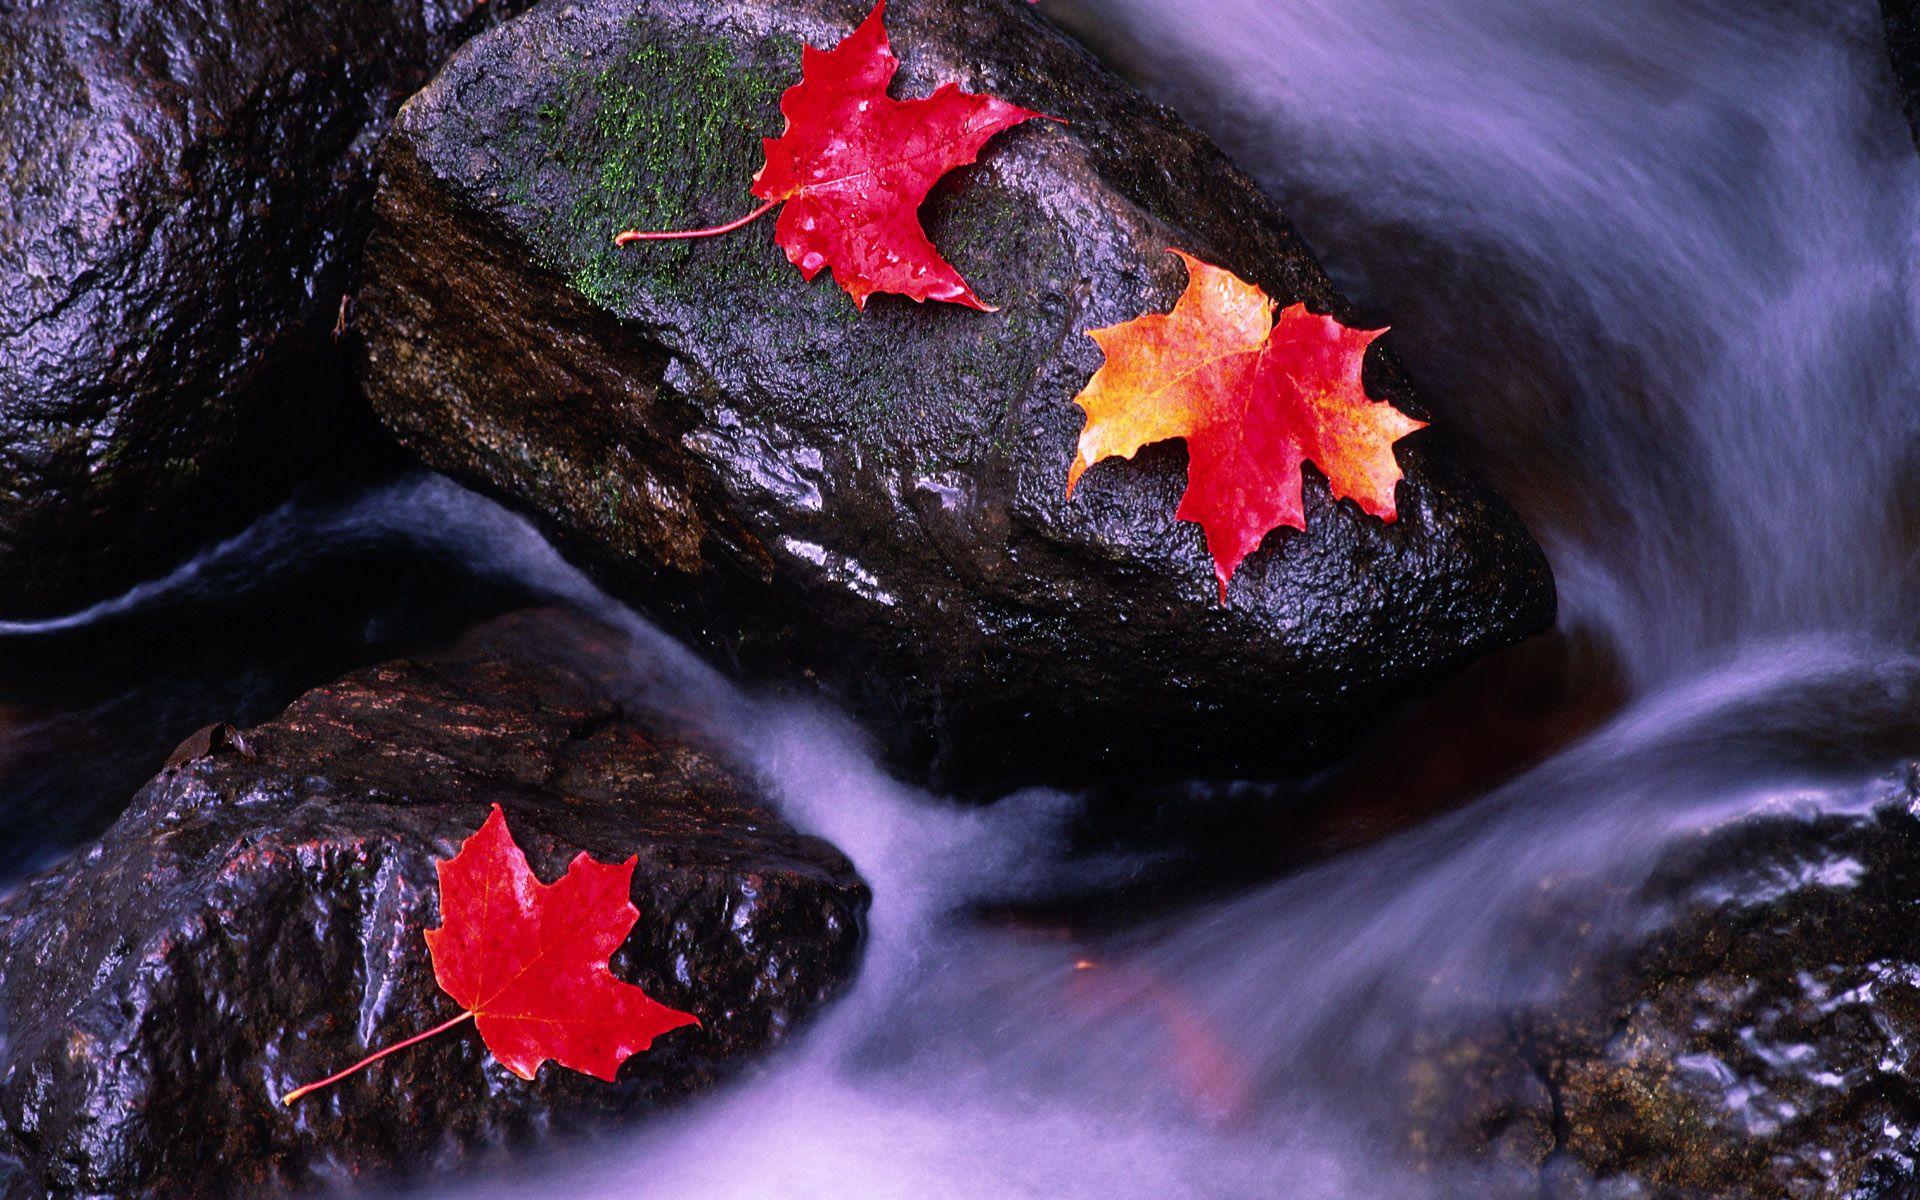 Rivers of Canada wallpaper and image, picture, photo